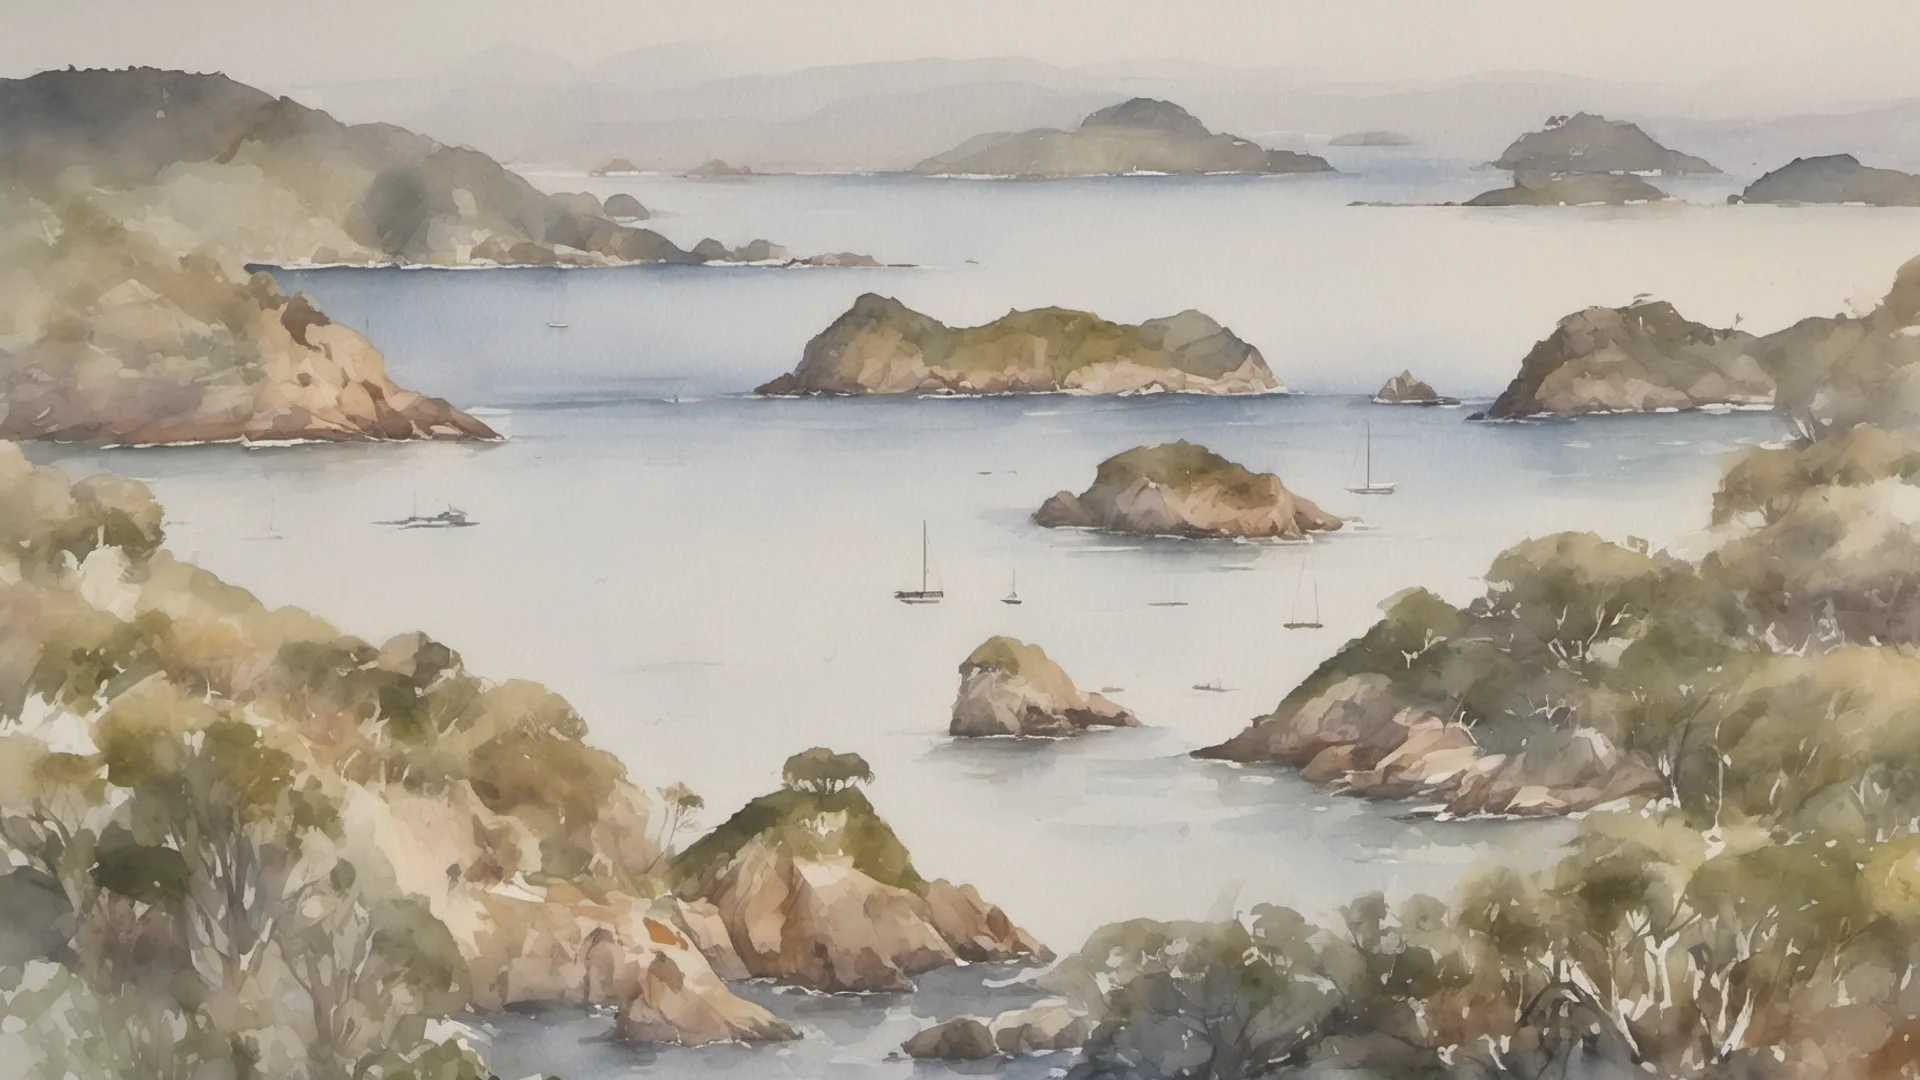 aipicturesque landscape watercolor beautiful neutral tones bay of islands grace stunning   confident engaging wow artstation art 3 wide